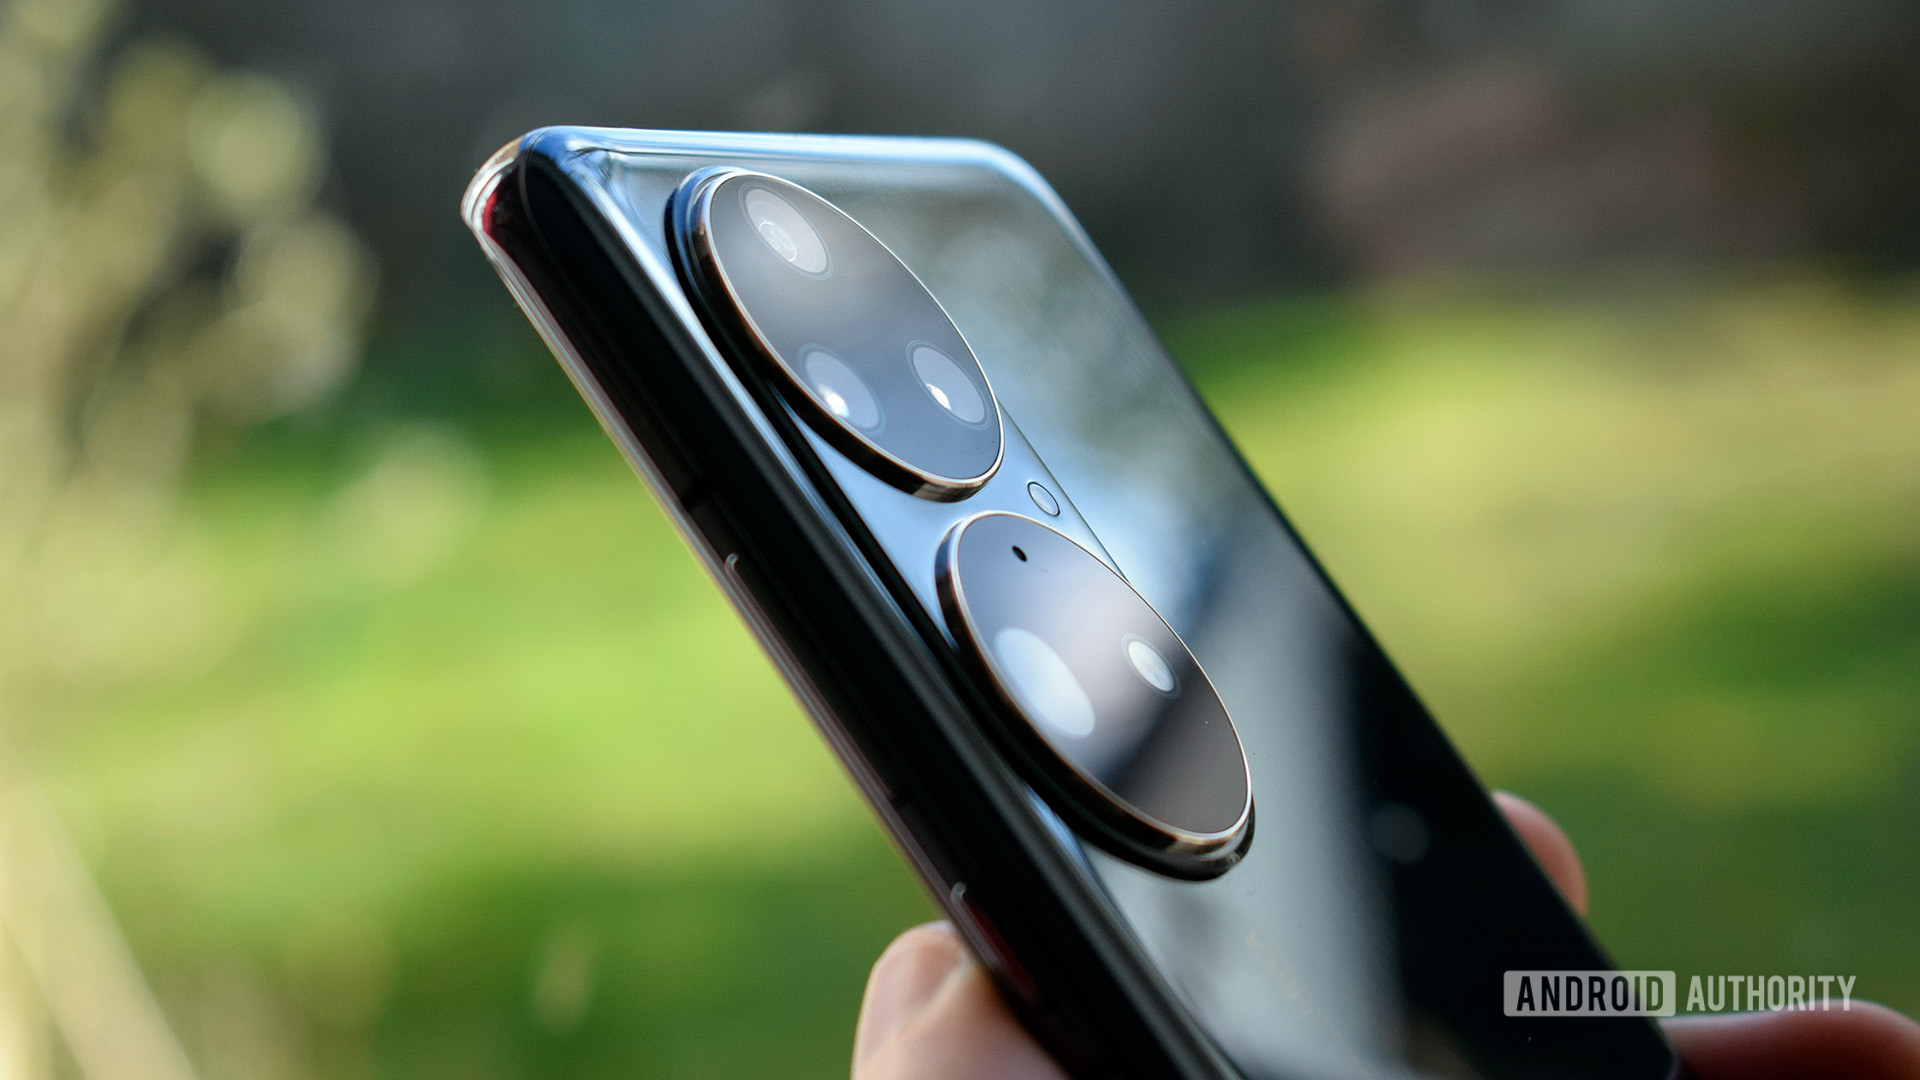 HUAWEI P50 Pro camera housing up close up in hand, taken outdoors with a green background